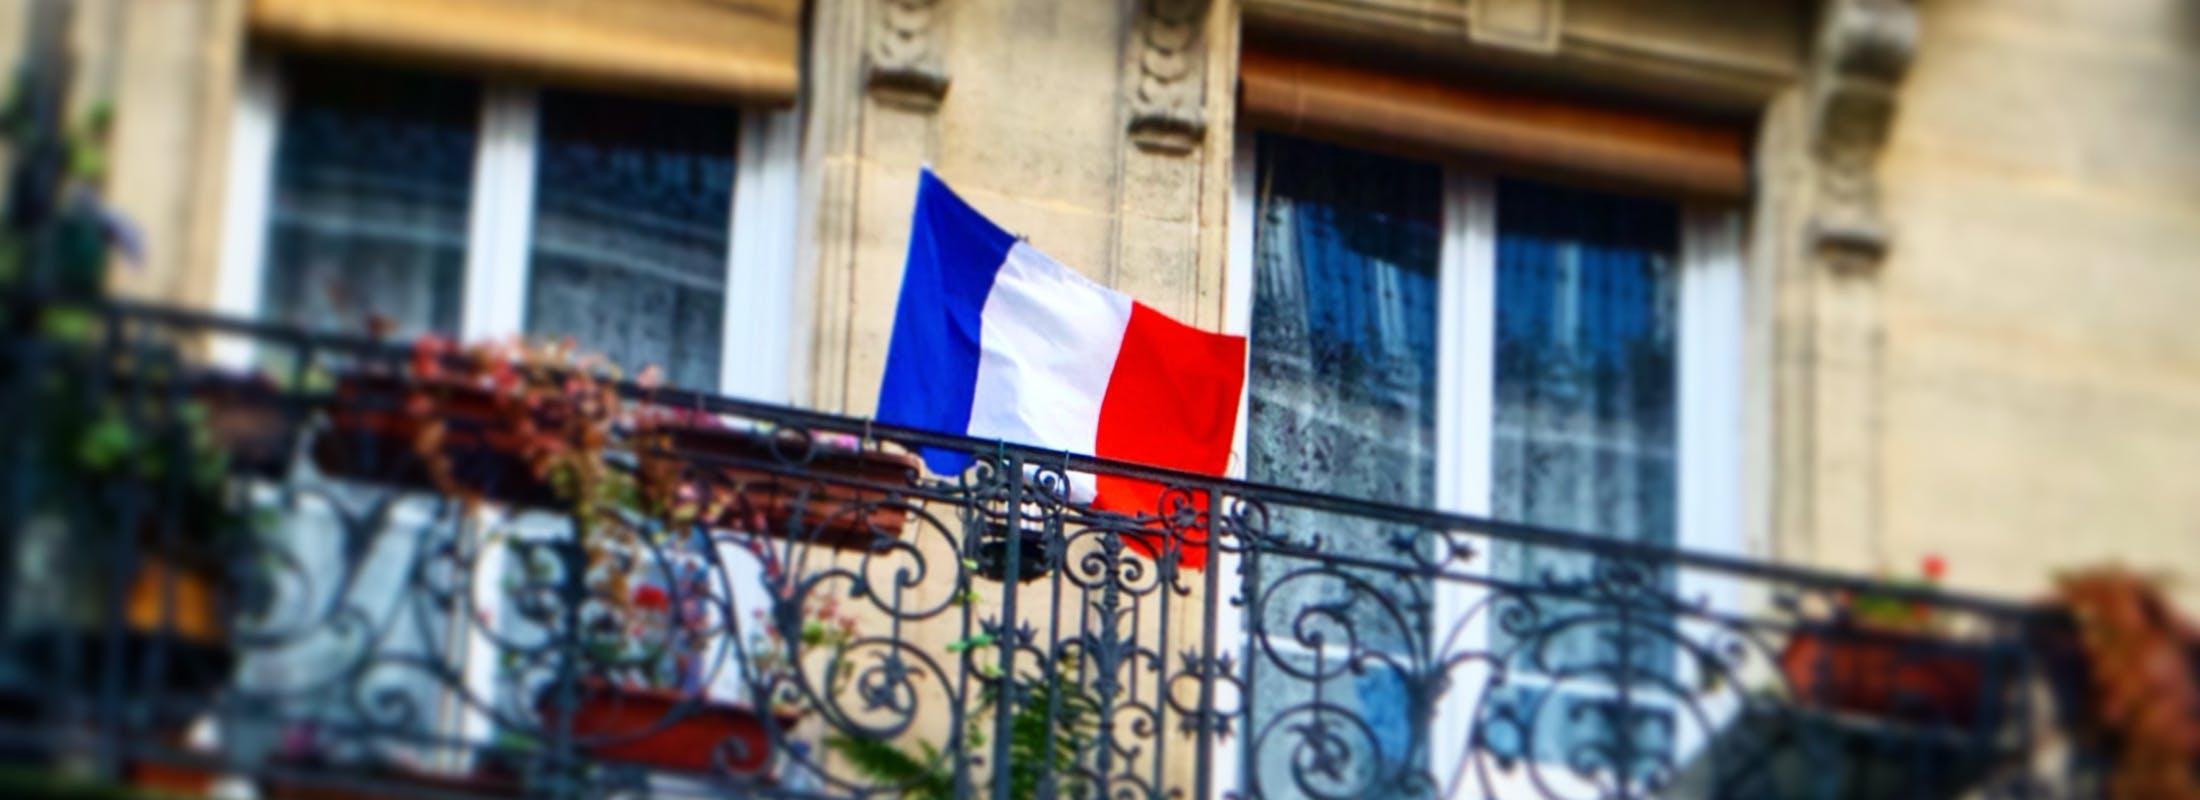 Safeguard review — French advisors reflect on highs and lows of restructuring cases